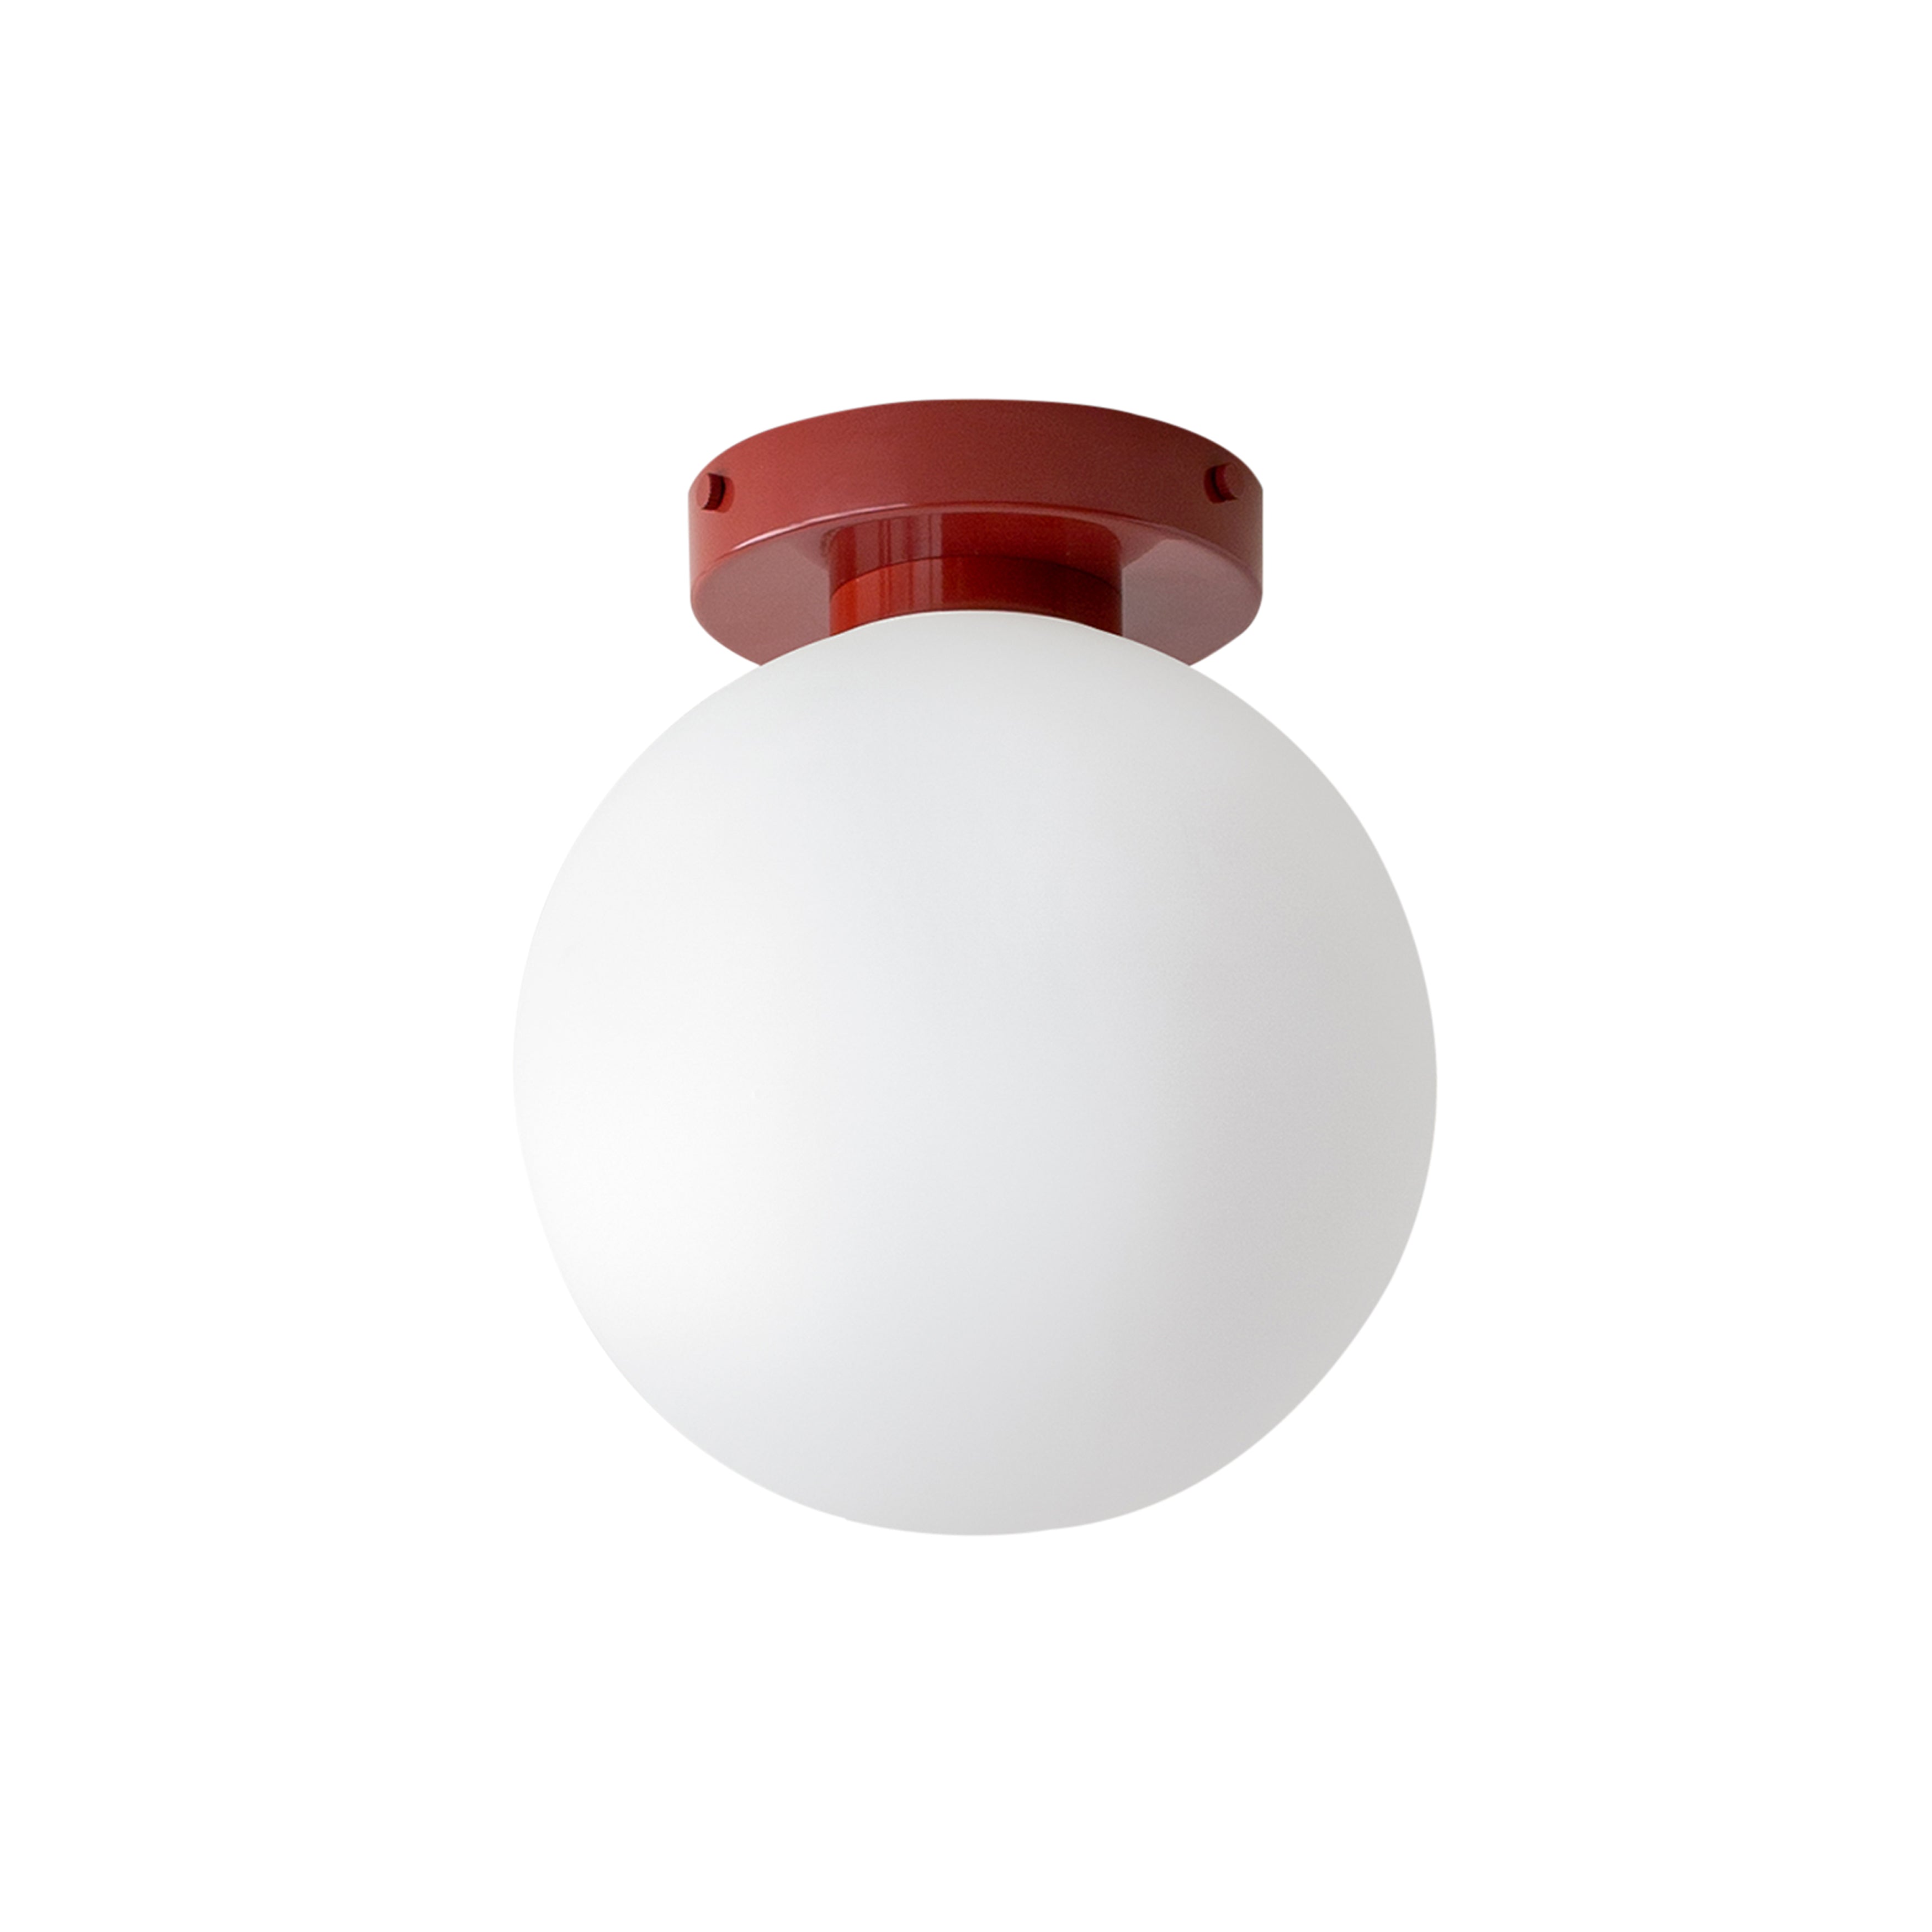 Orb 8 Surface Mount: Oxide Red